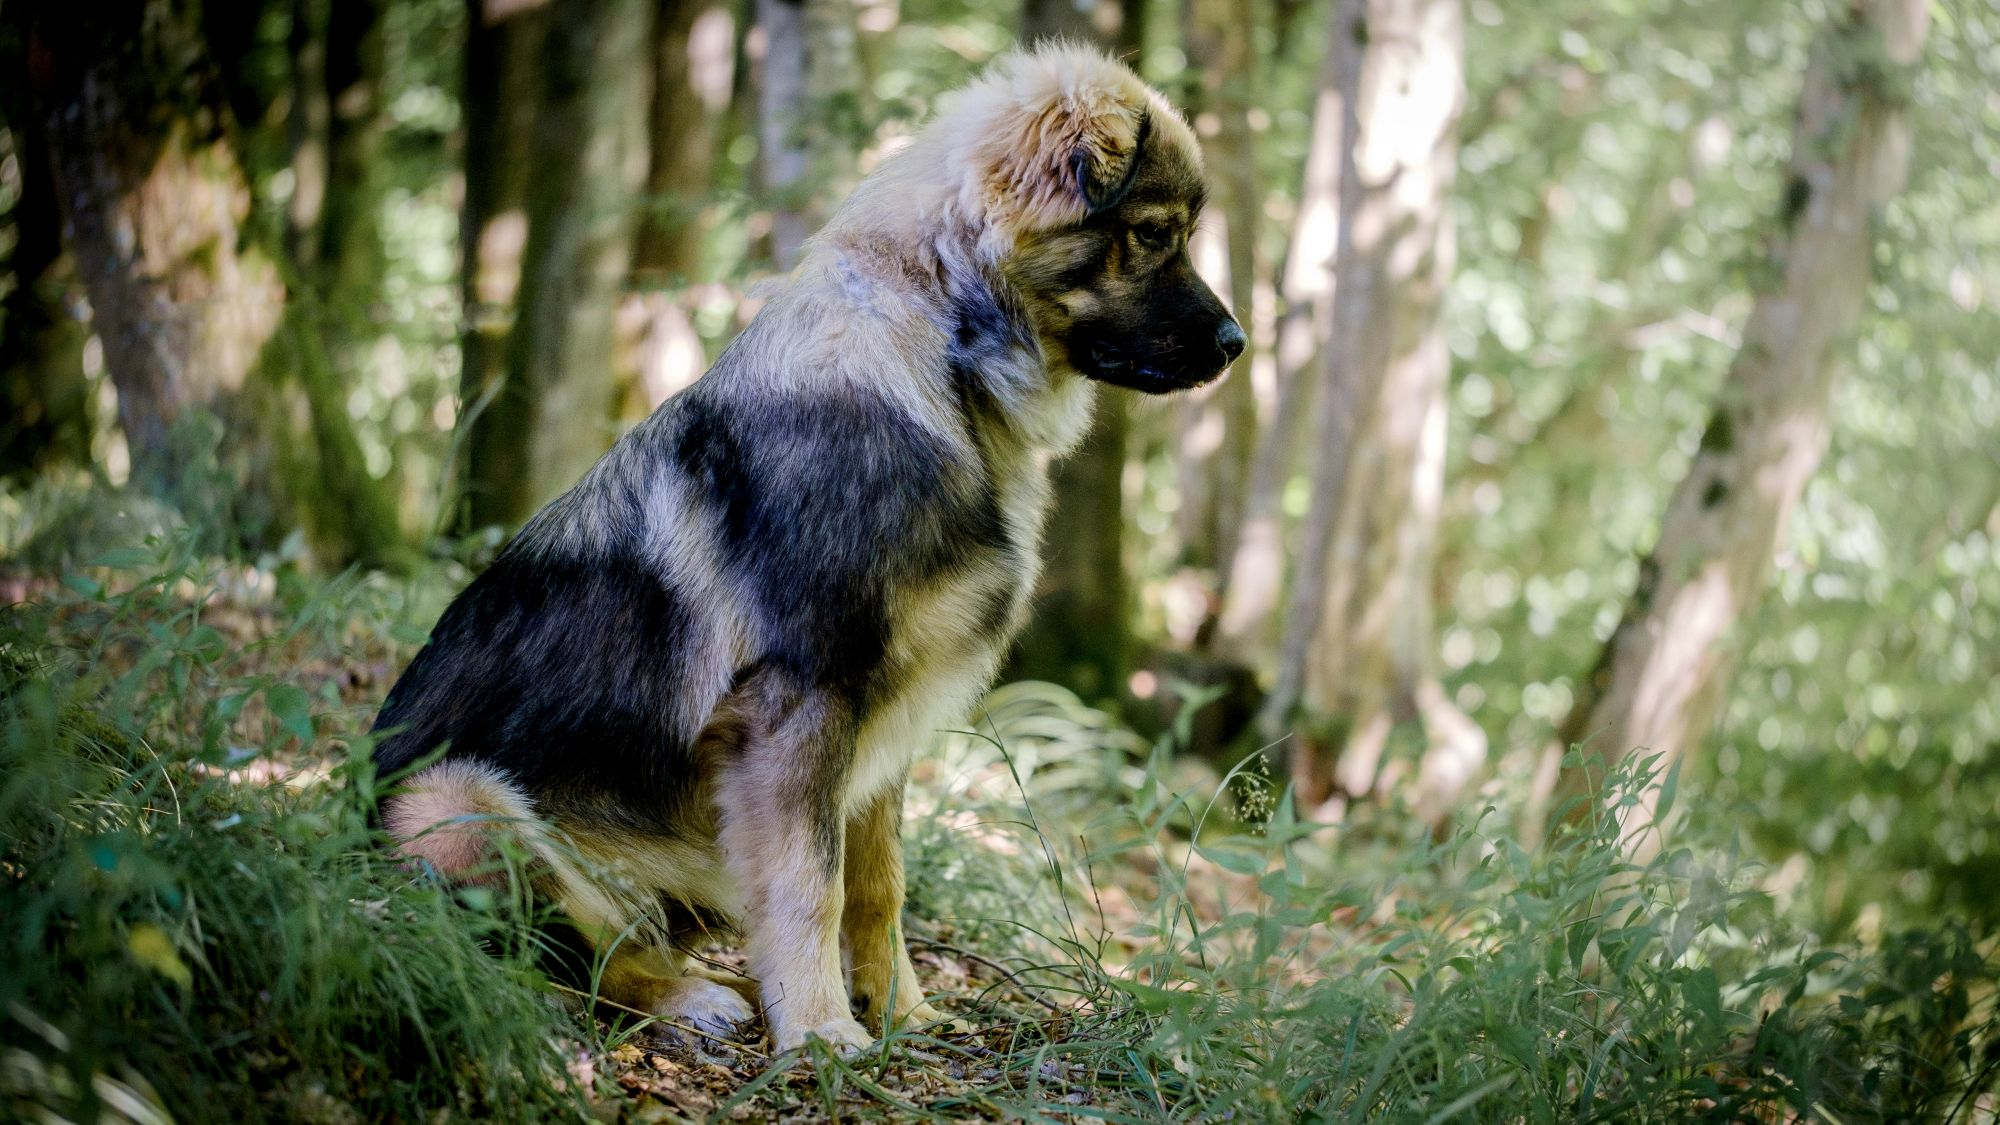 Karst Shepherd Dog sat in a forest, looking downhill